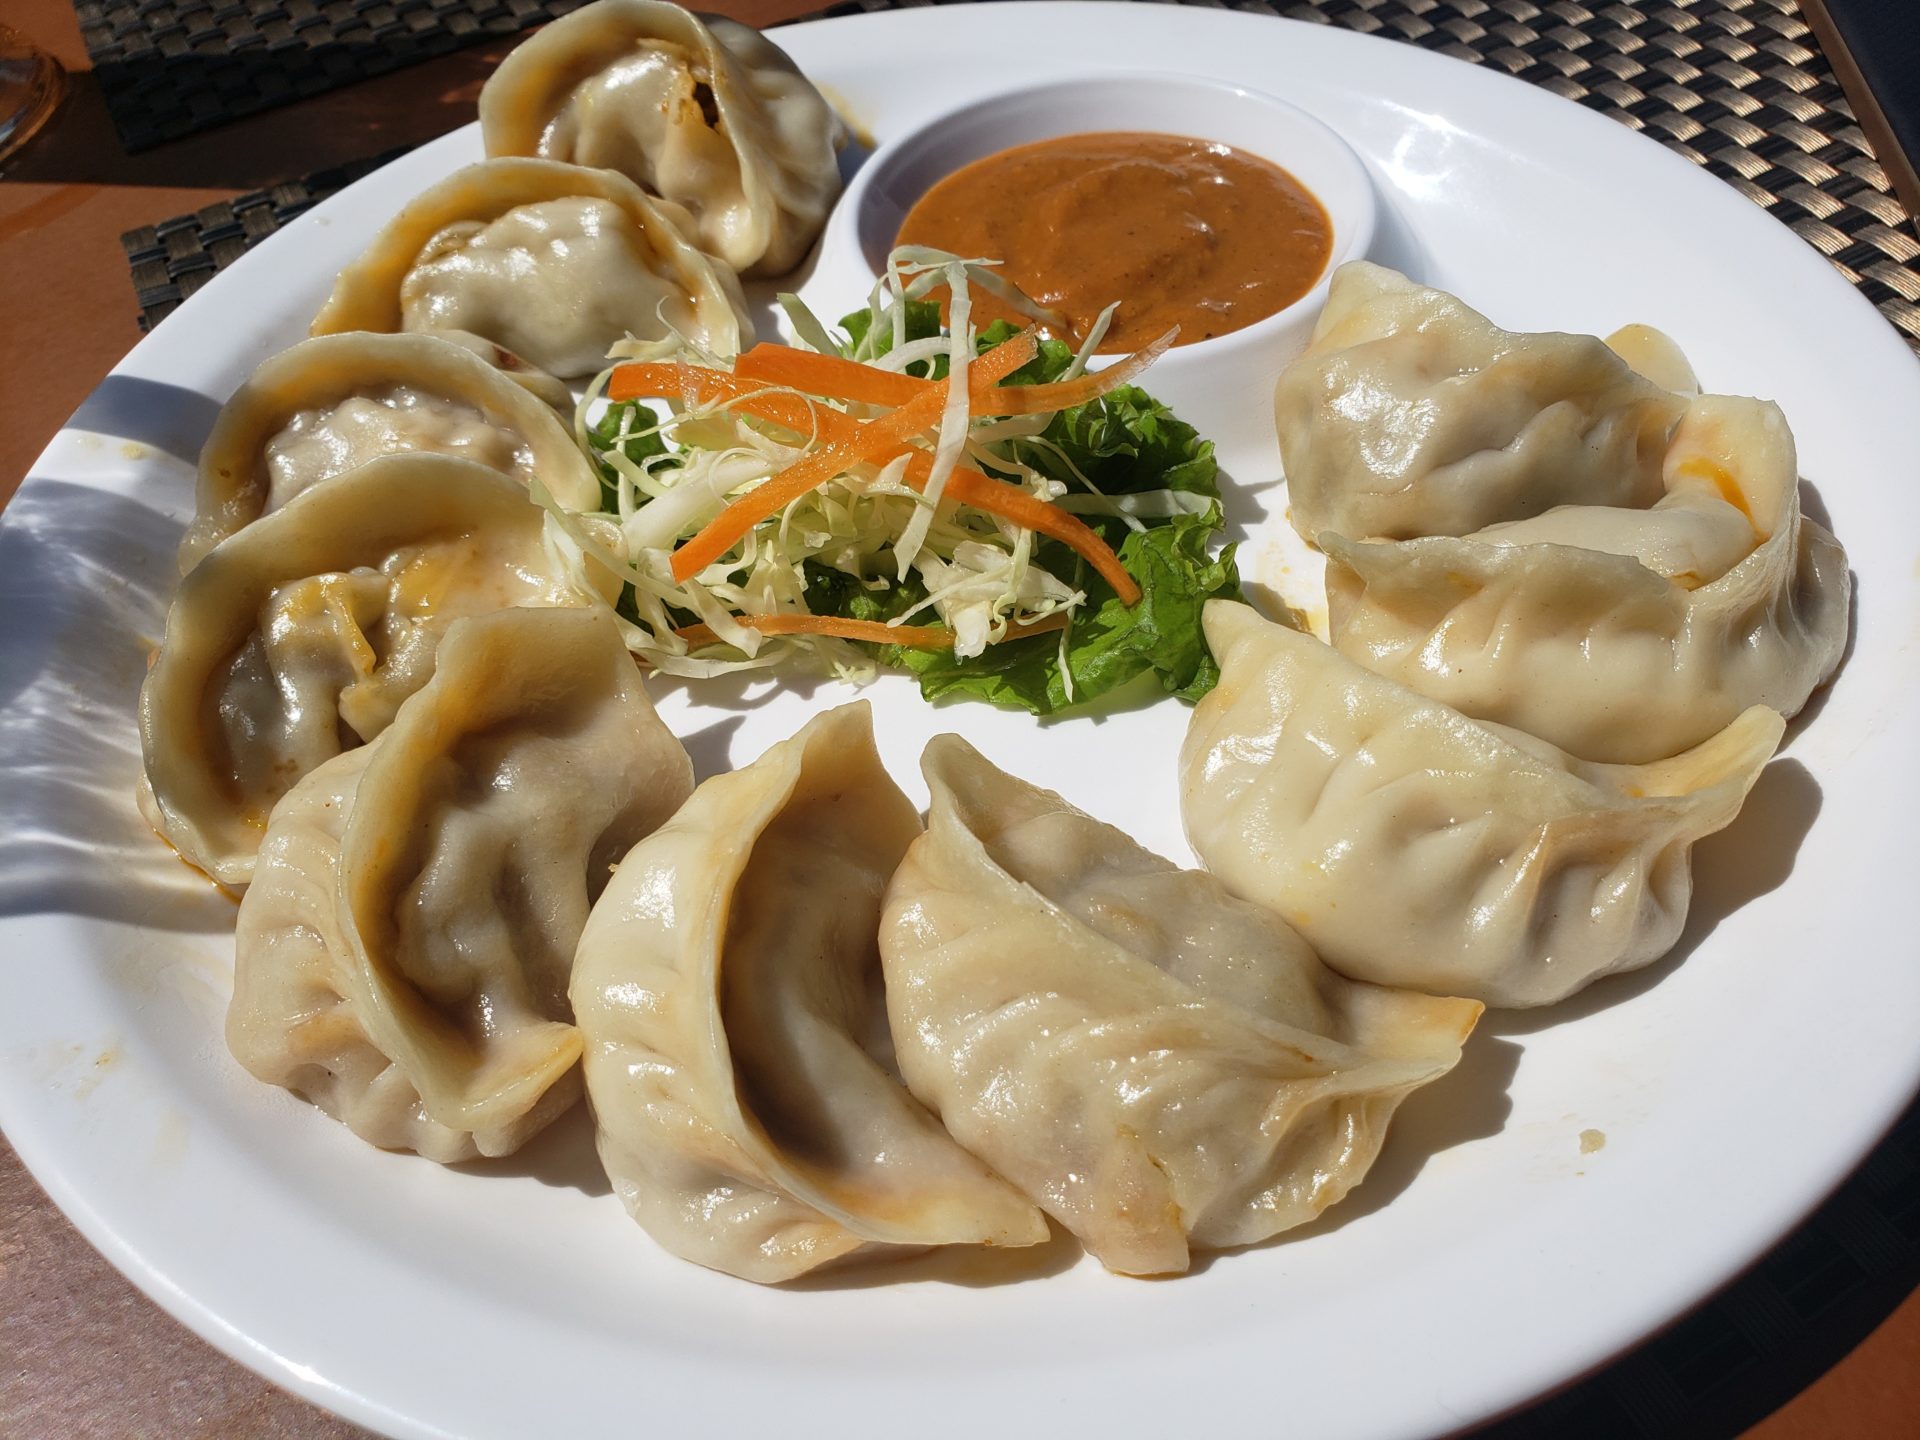 a plate of dumplings with sauce